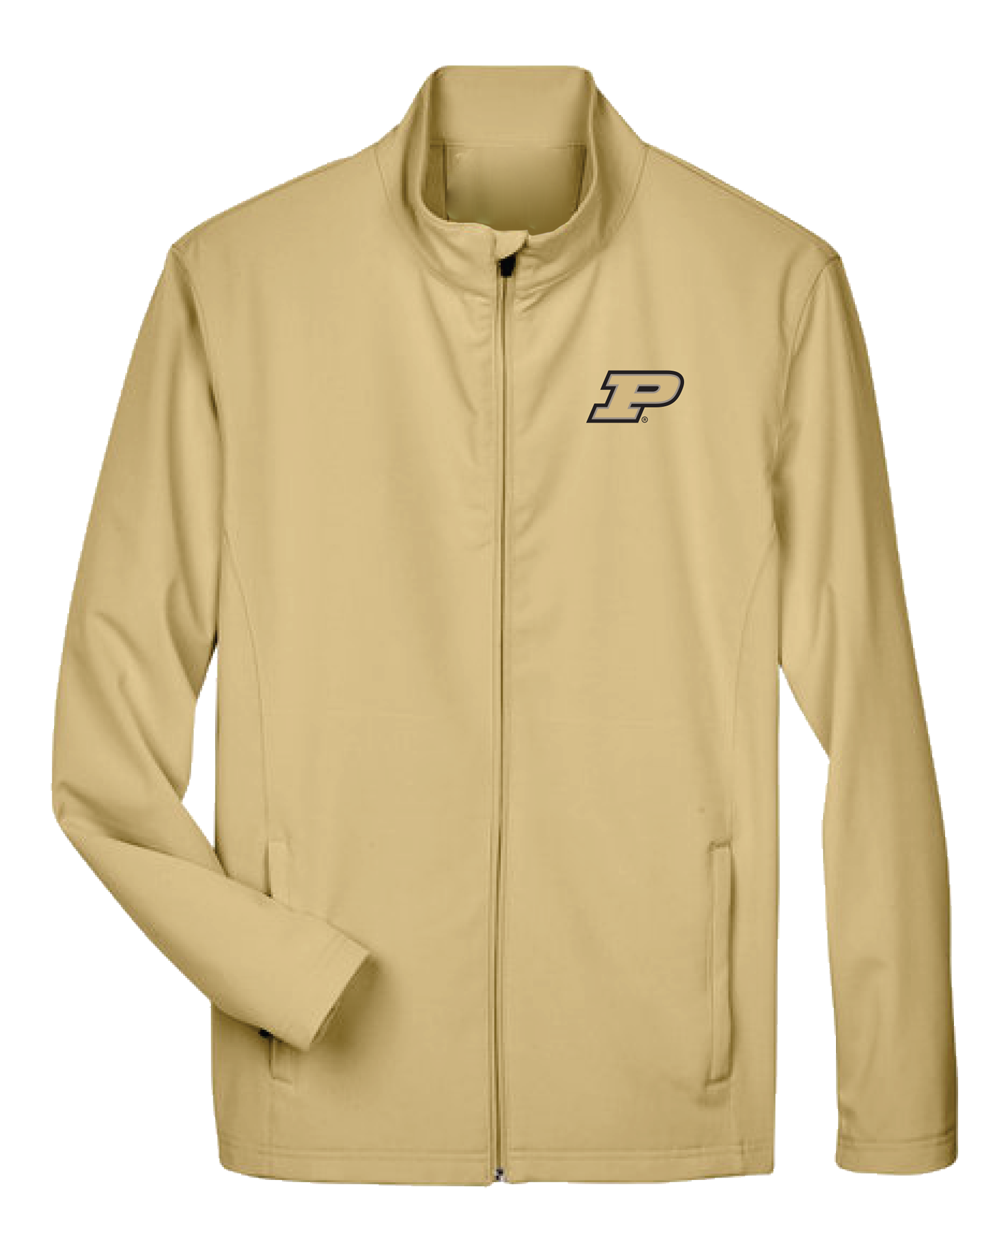 Purdue Boilermakers Soft Shell Jacket